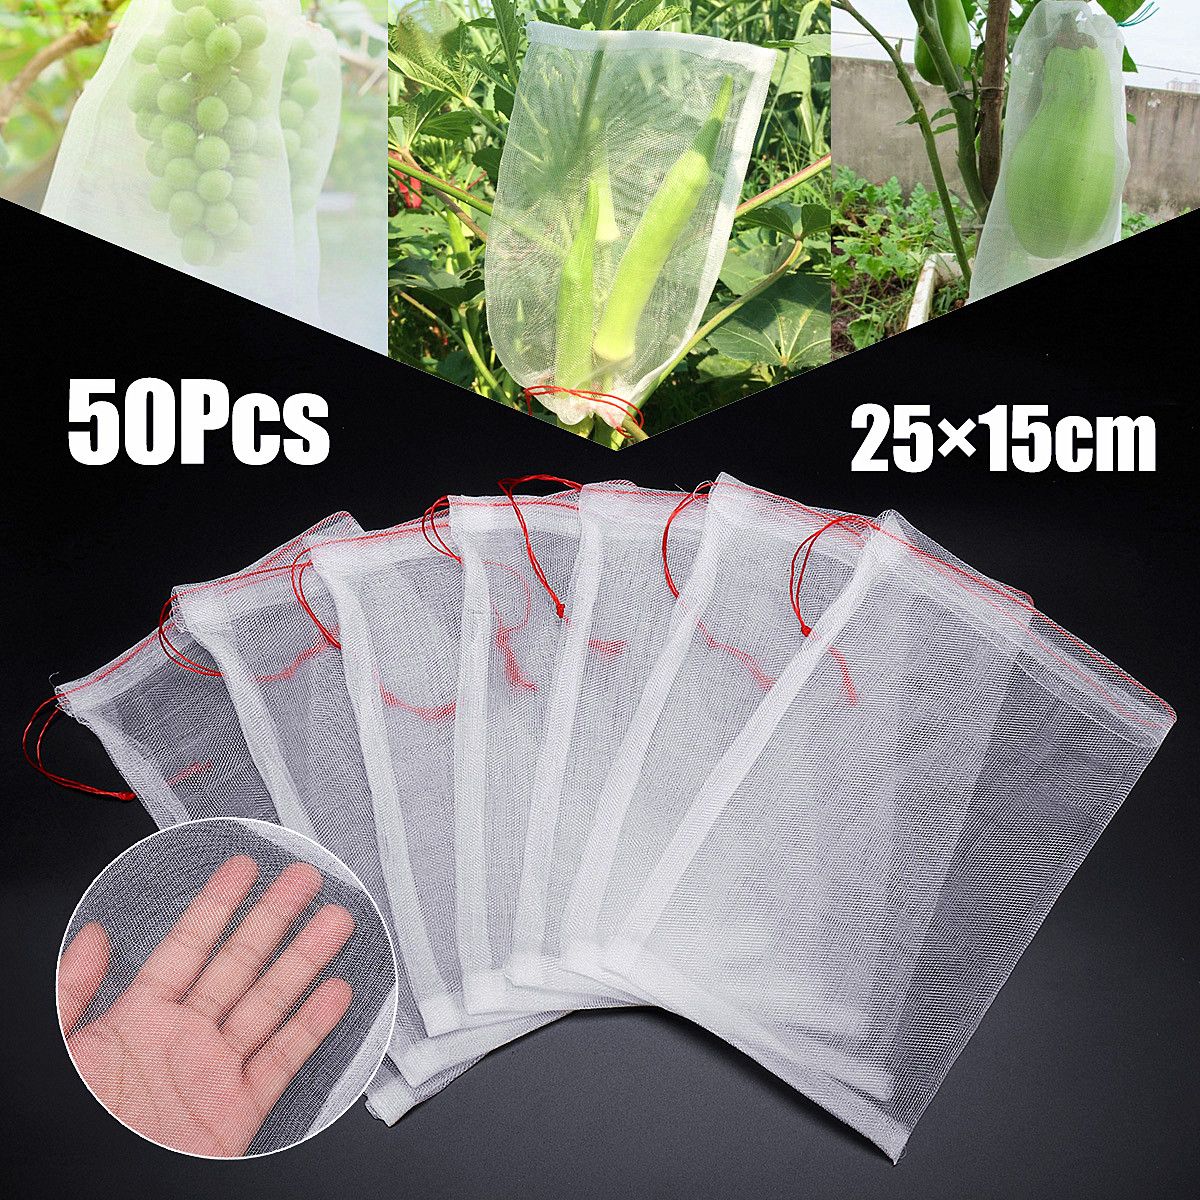 50Pcs-Agriculture-Garden-Drawstring-Mesh-Net-Bag-Fruit-Vegetable-Plant-Protect-Anti-Insect-Bird-1354622